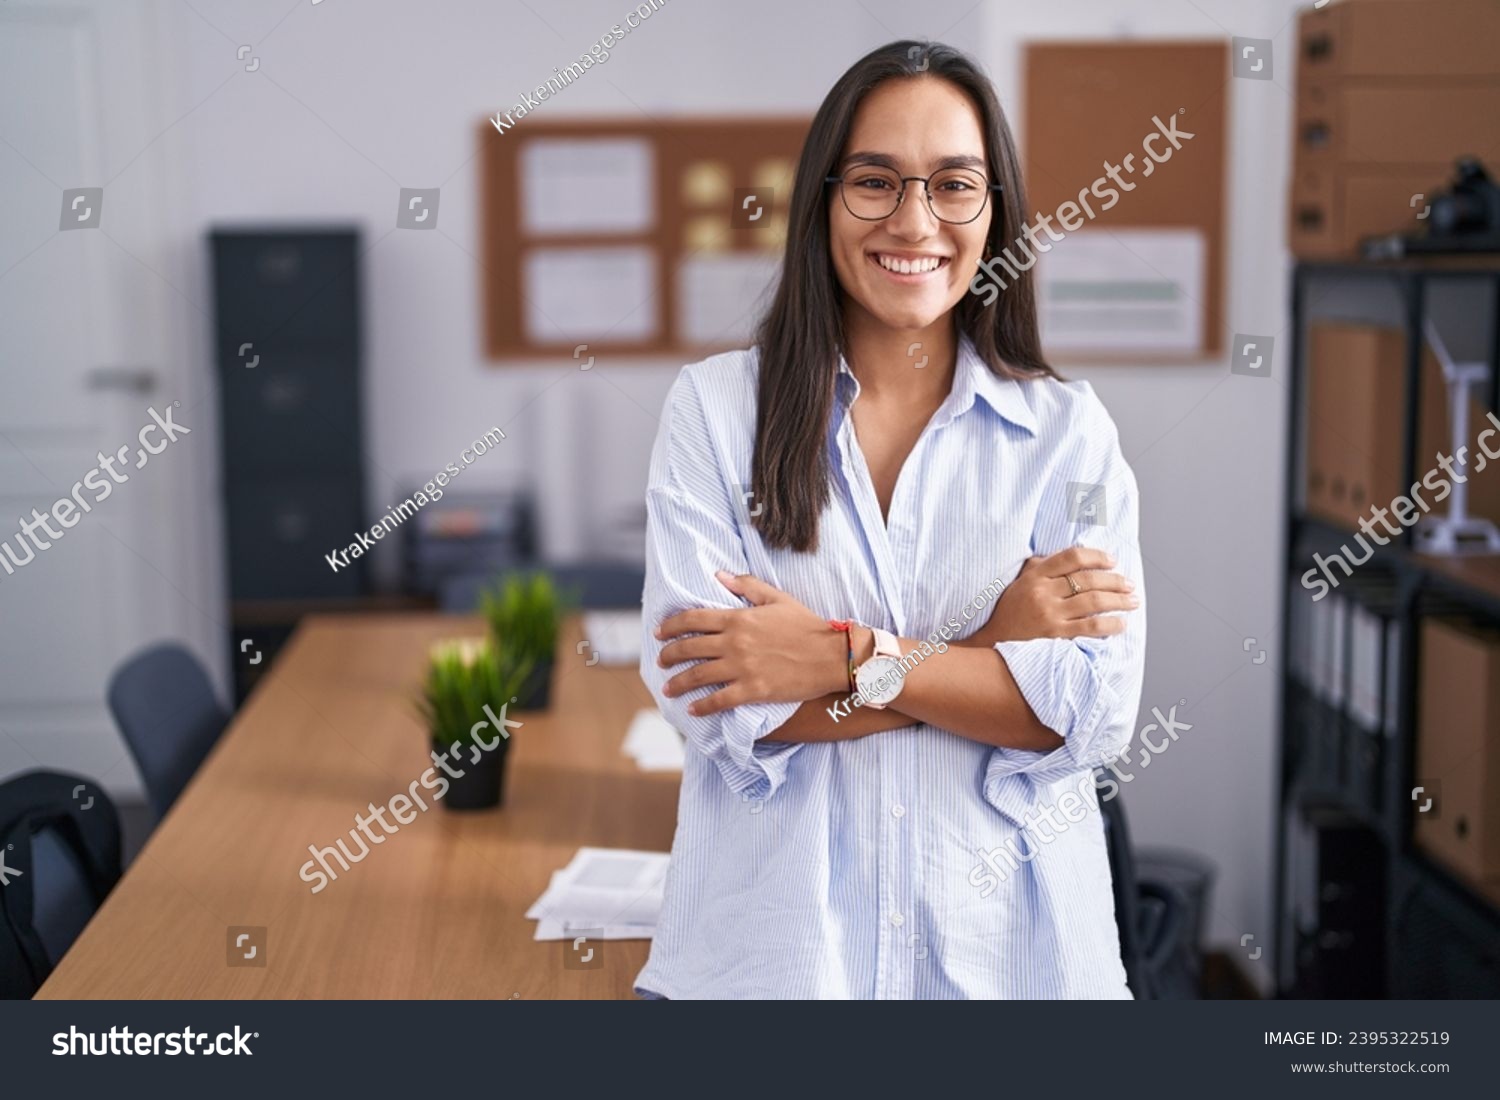 Young hispanic woman at the office happy face smiling with crossed arms looking at the camera. positive person.  #2395322519